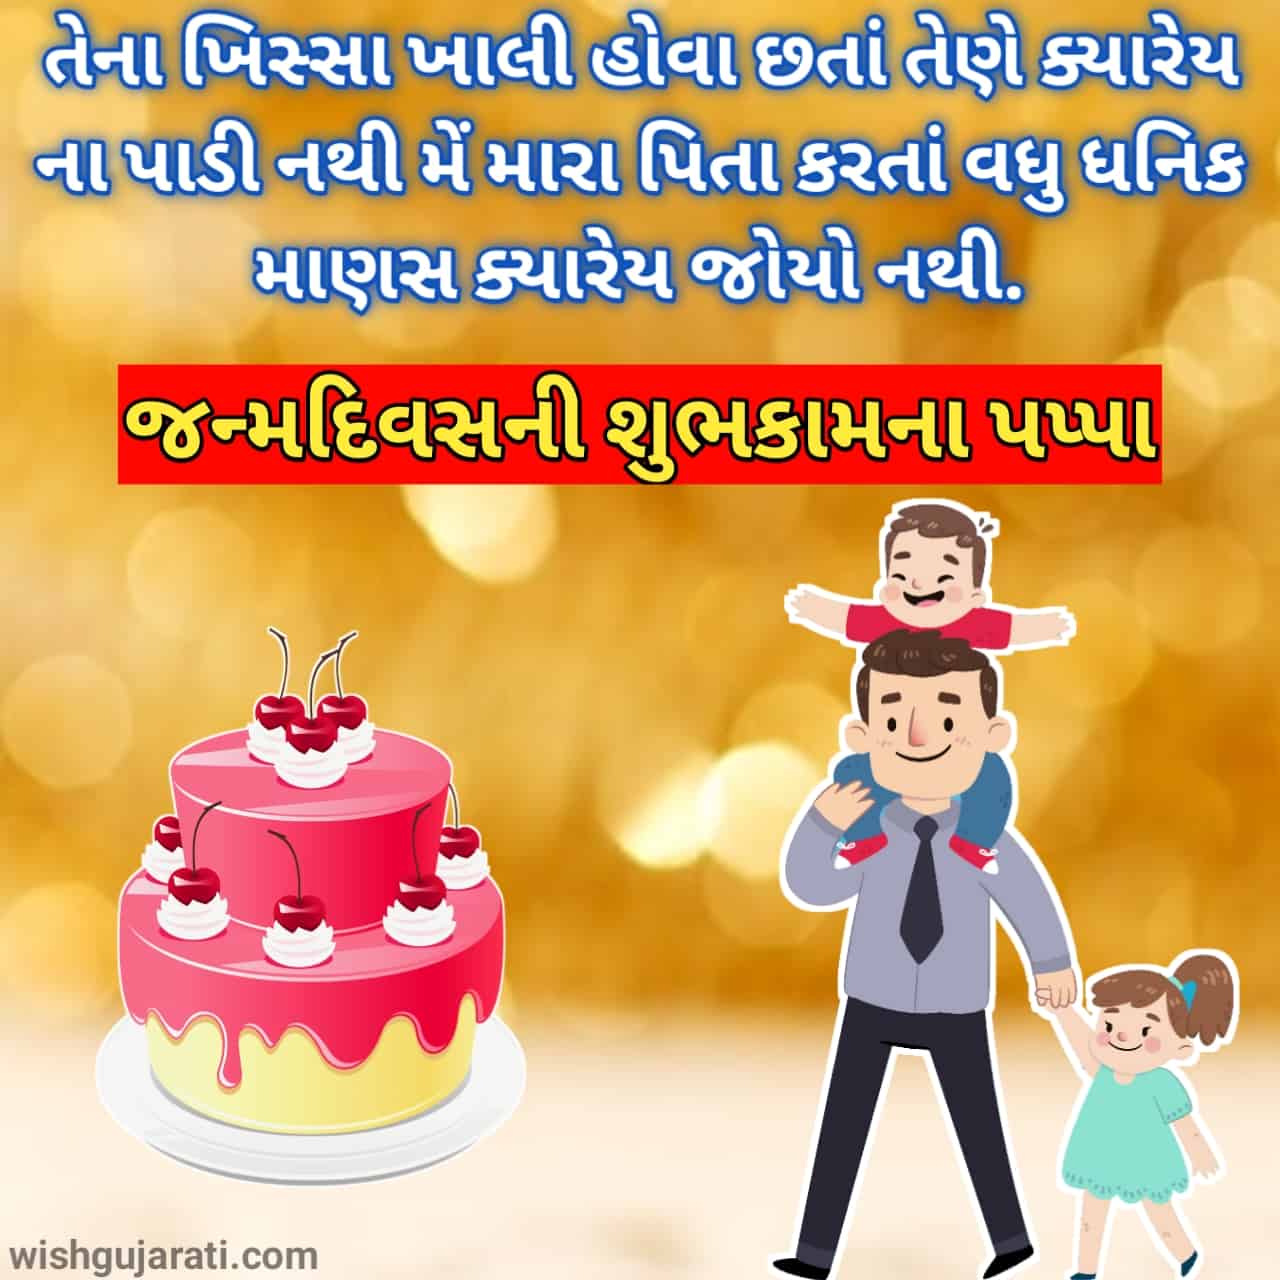 Happy Birthday Wishes For Father in Marathi from daughter or son Quotes  Status Captions Heart touching Messages to papa vadhdivsachya hardik  shubhechha baba; वडीलांचा वाढदिवस होईल खास; 'या' शुभेच्छा येतील ...